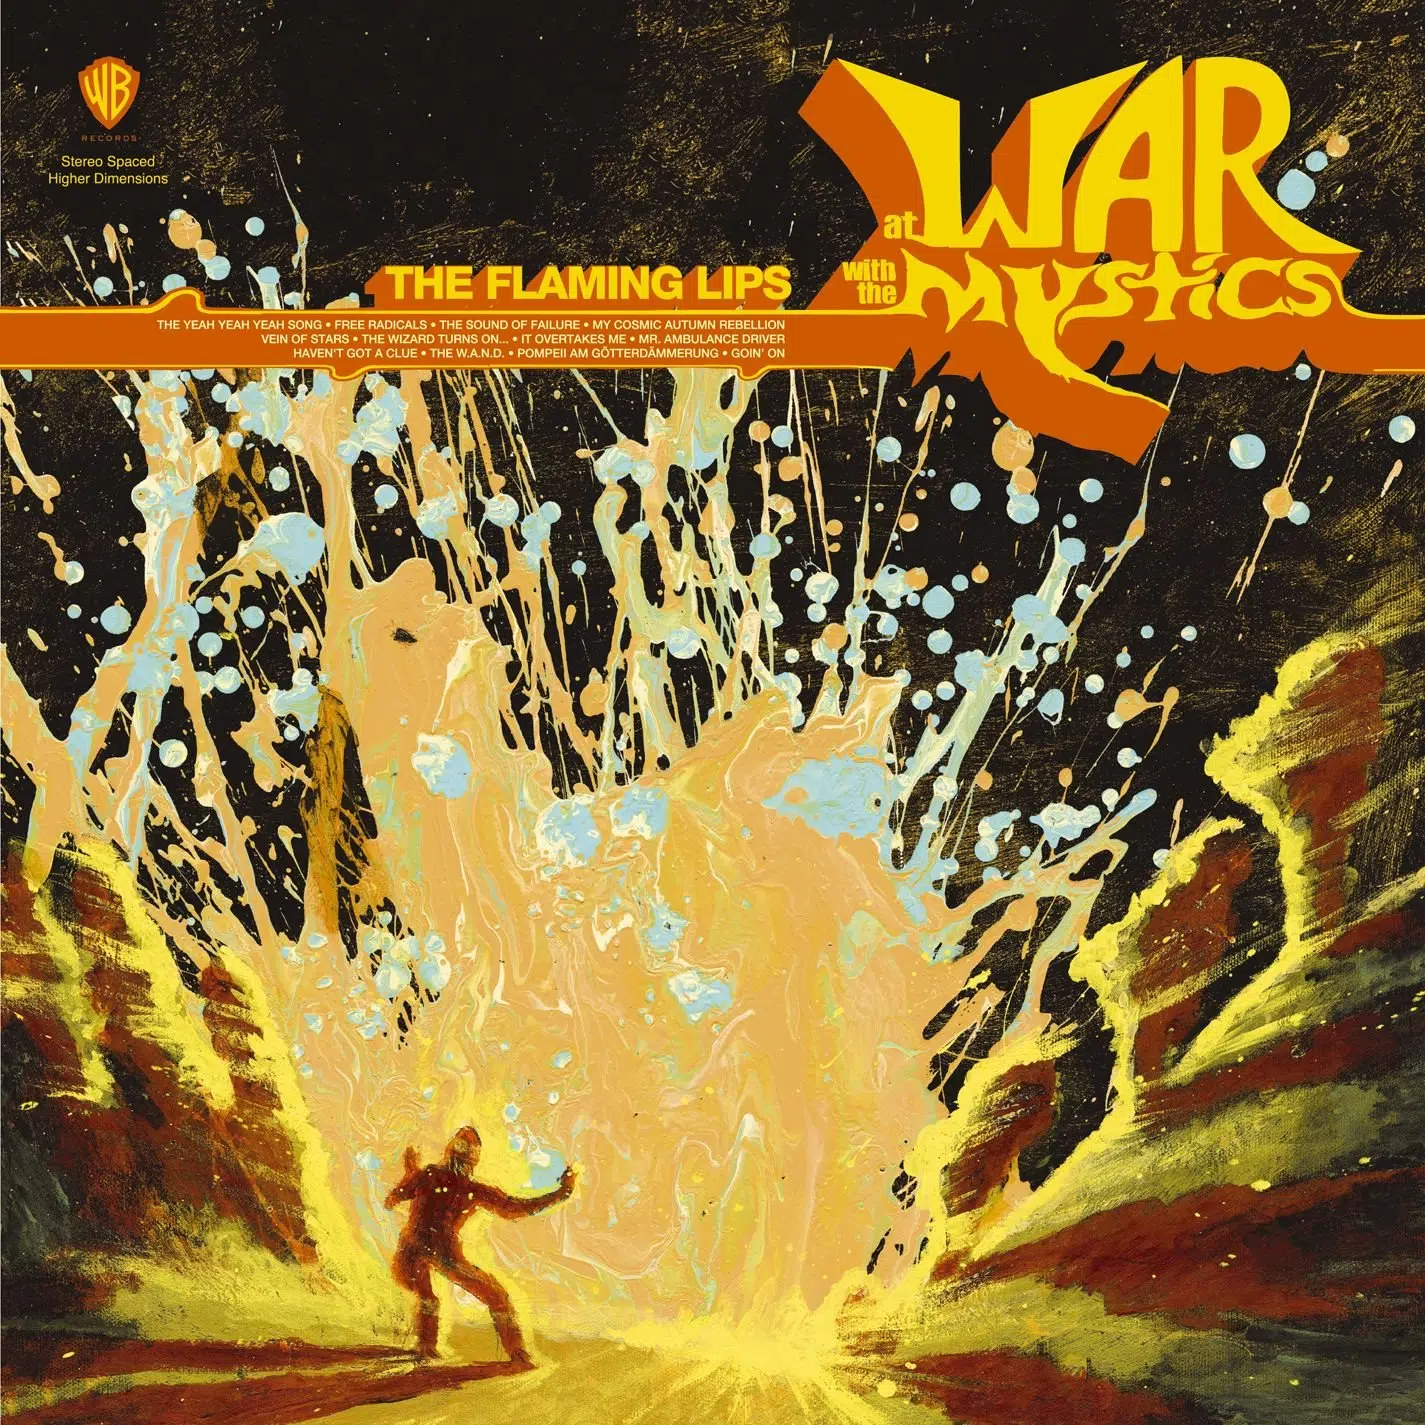 The Flaming Lips At War with the Mystics